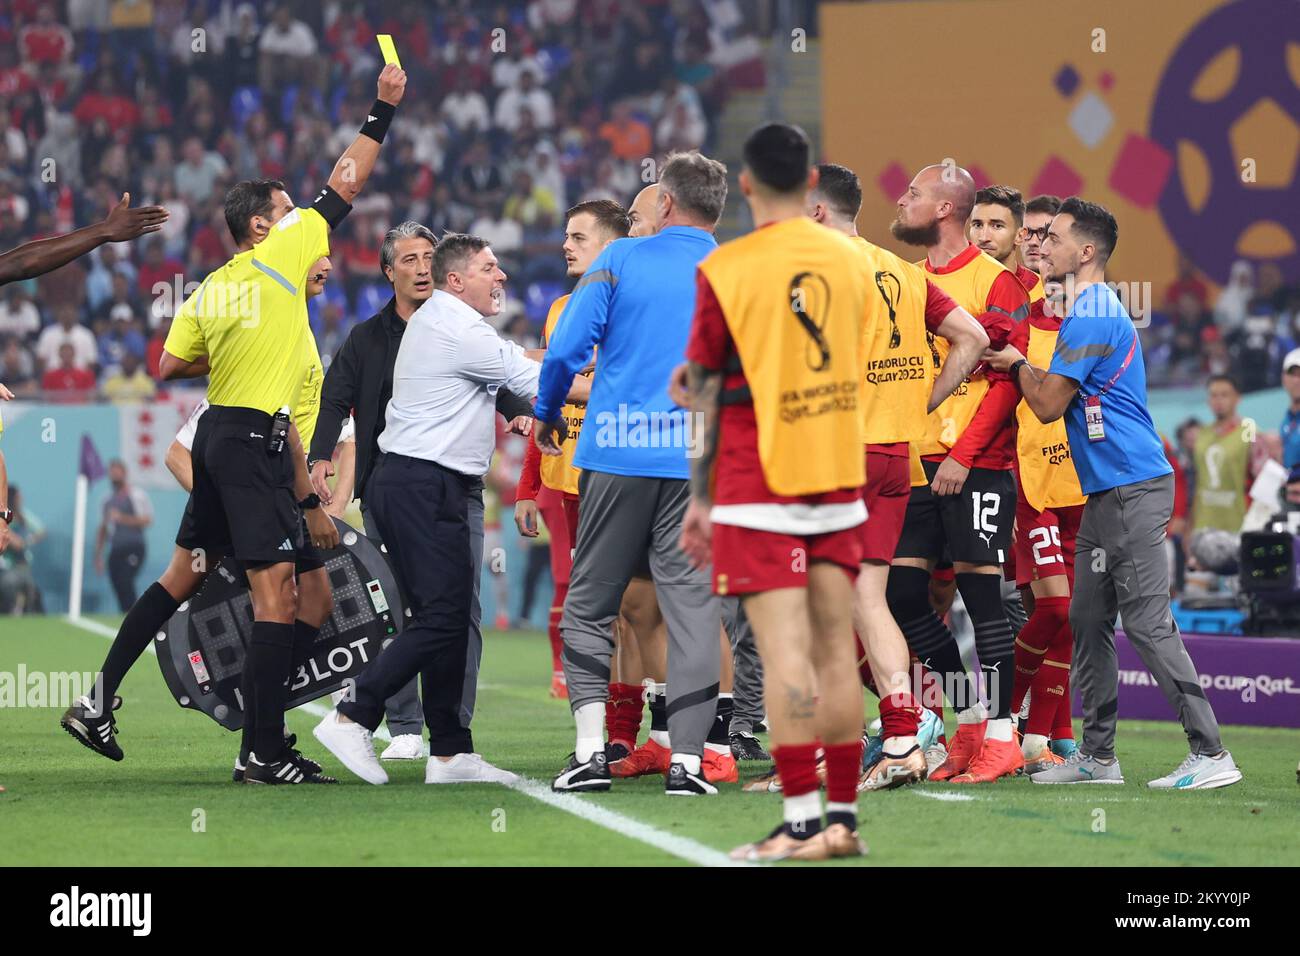 Doha, Qatar. 2nd Dec, 2022. Referee Fernando Andres Rapallini (1st L) gives a yellow card to Serbia's goalkeeper Predrag Rajkovic during the Group G match between Serbia and Switzerland at the 2022 FIFA World Cup at Stadium 974 in Doha, Qatar, Dec. 2, 2022. Credit: Xu Zijian/Xinhua/Alamy Live News Stock Photo